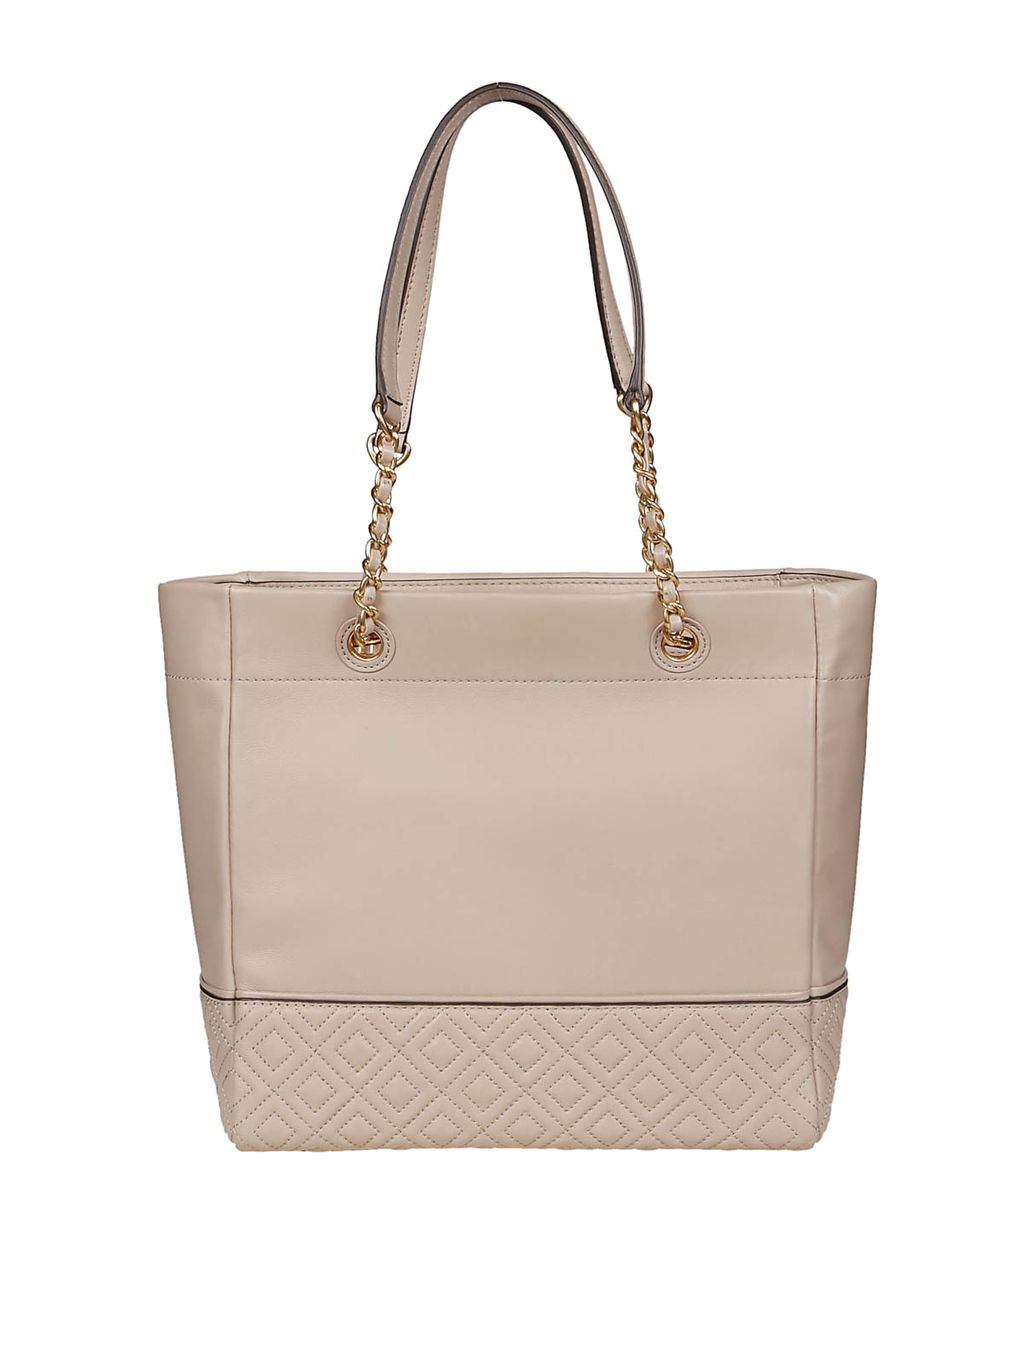 iKRIX-tory-burch-totes-bags-fleming-light-taupe-leather-tote-bag-00000148468f00s003.jpg